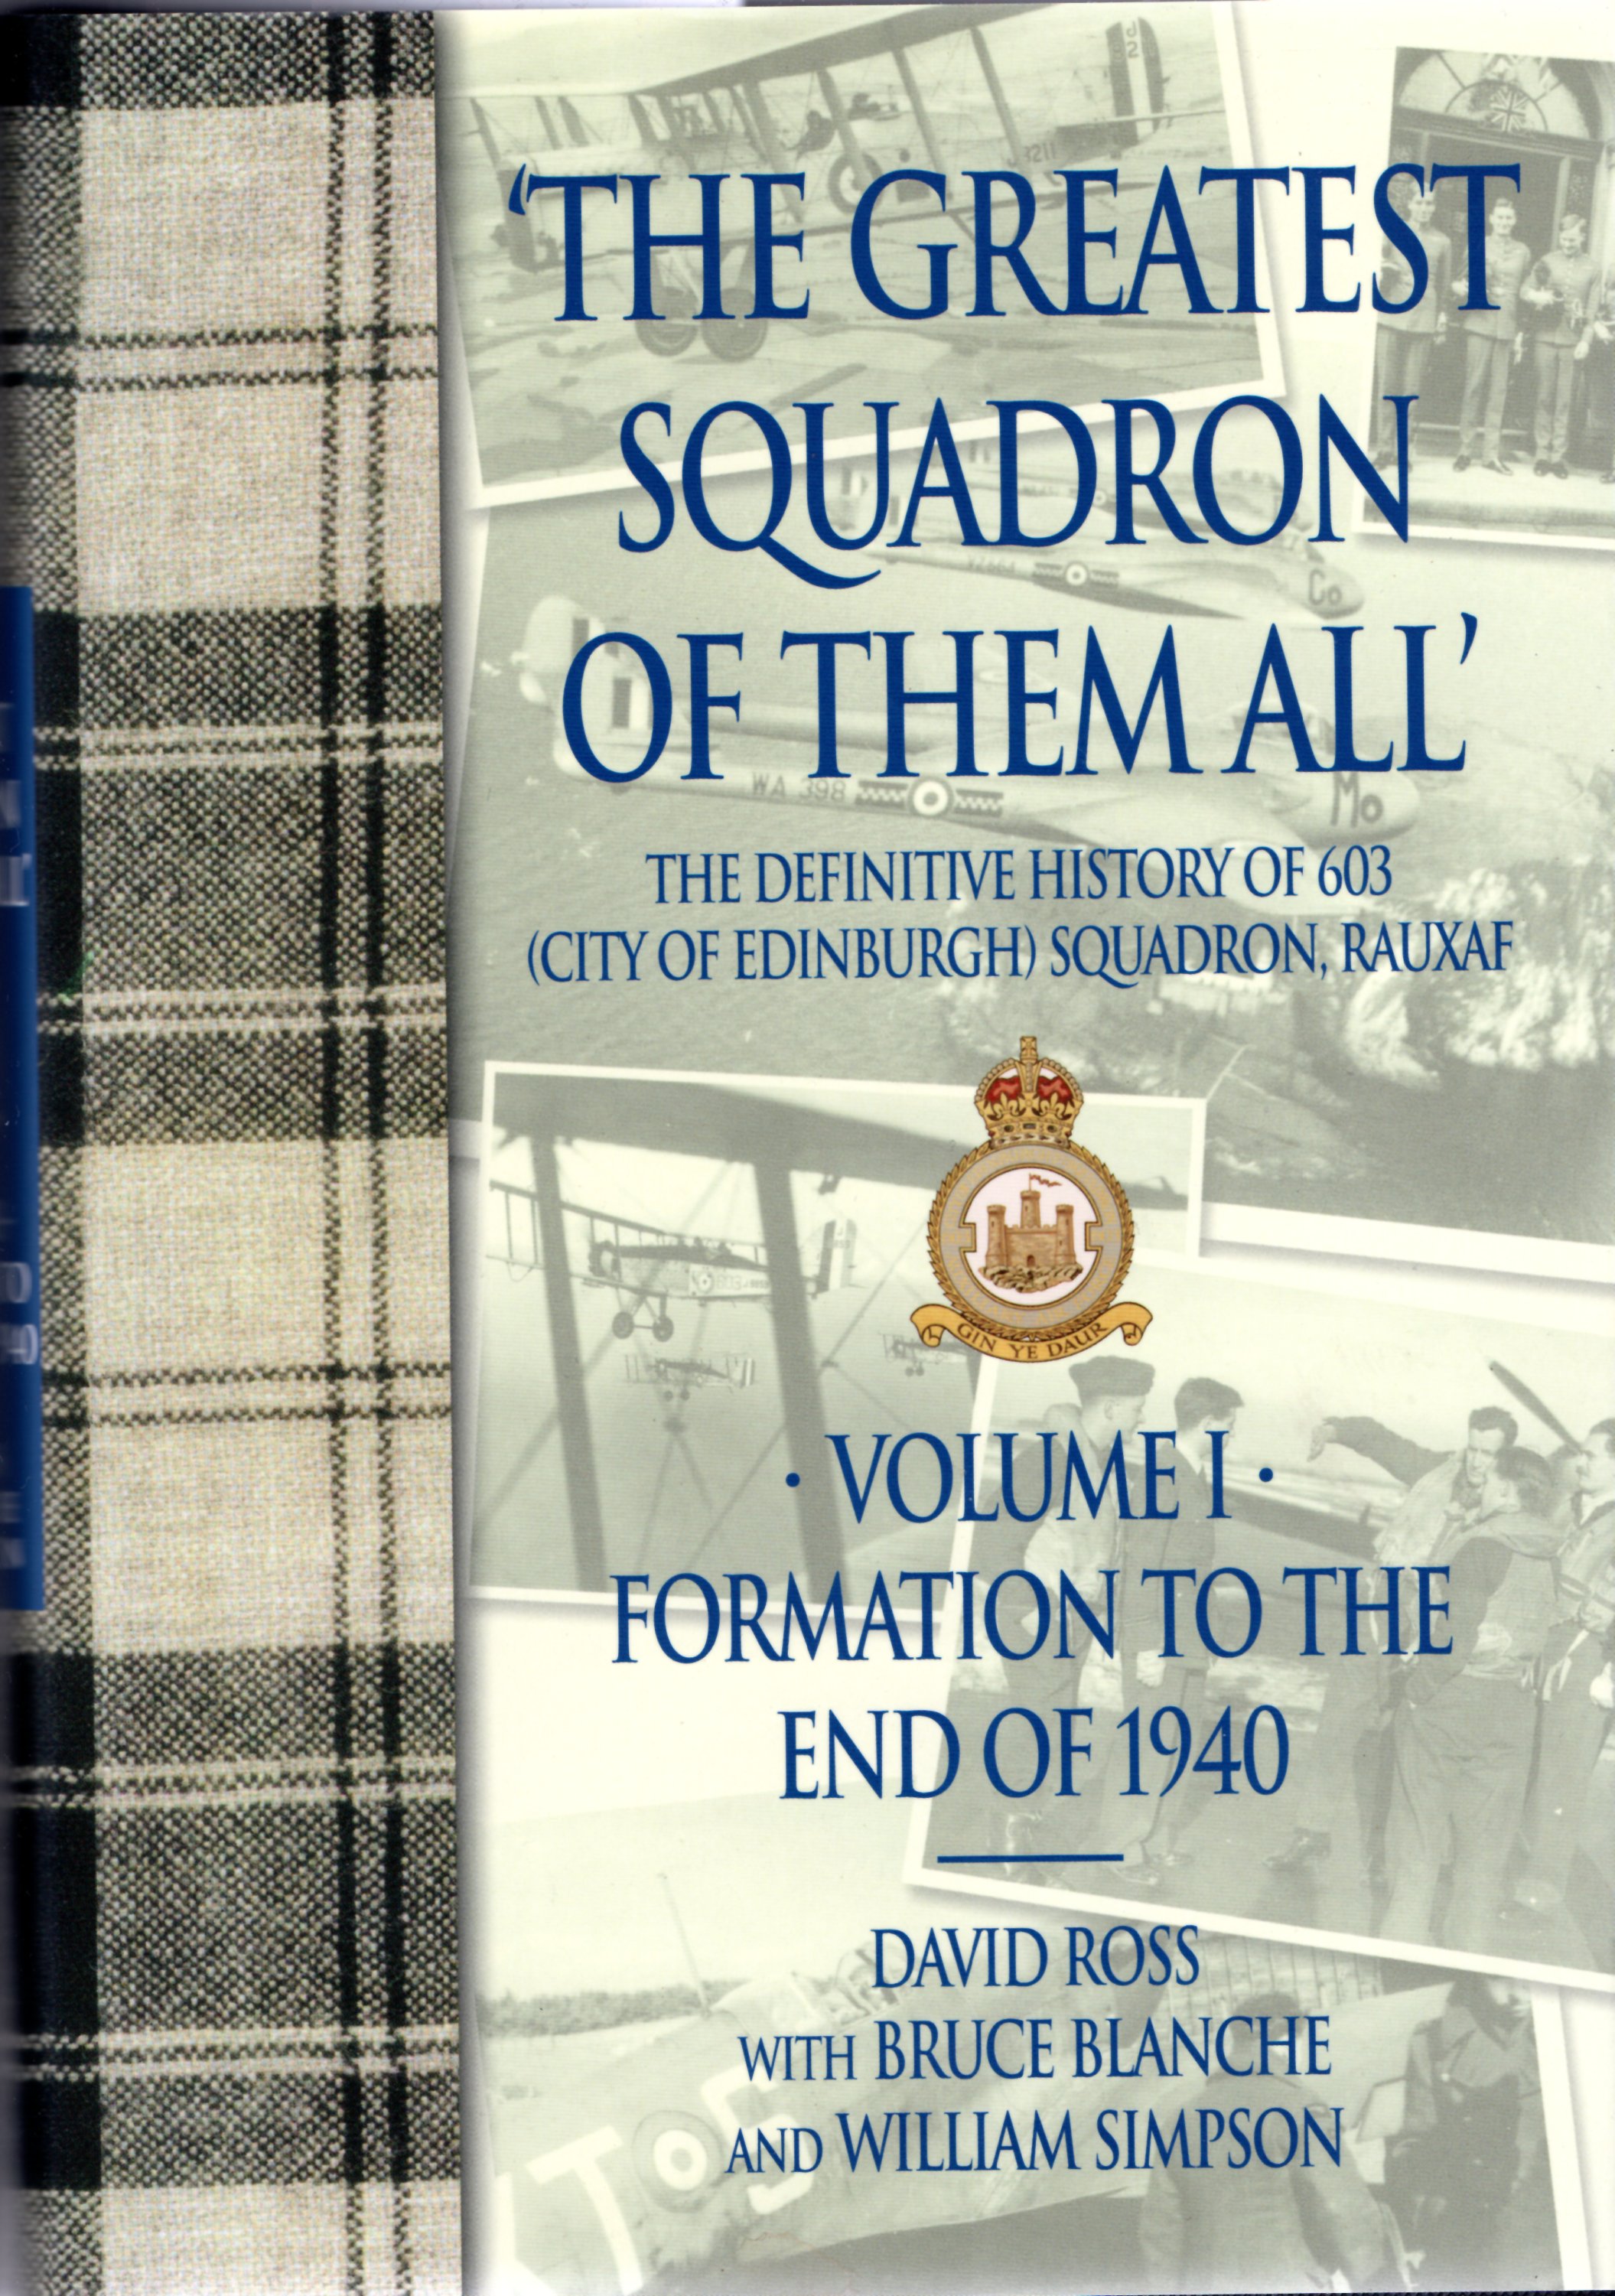 Image for The Greatest Squadron of them All: The Definitive History of 603 (City of Edinburgh) Squadron: Volume 1: Formation to the End of 1941 & Volume 2: 1941 To Date.